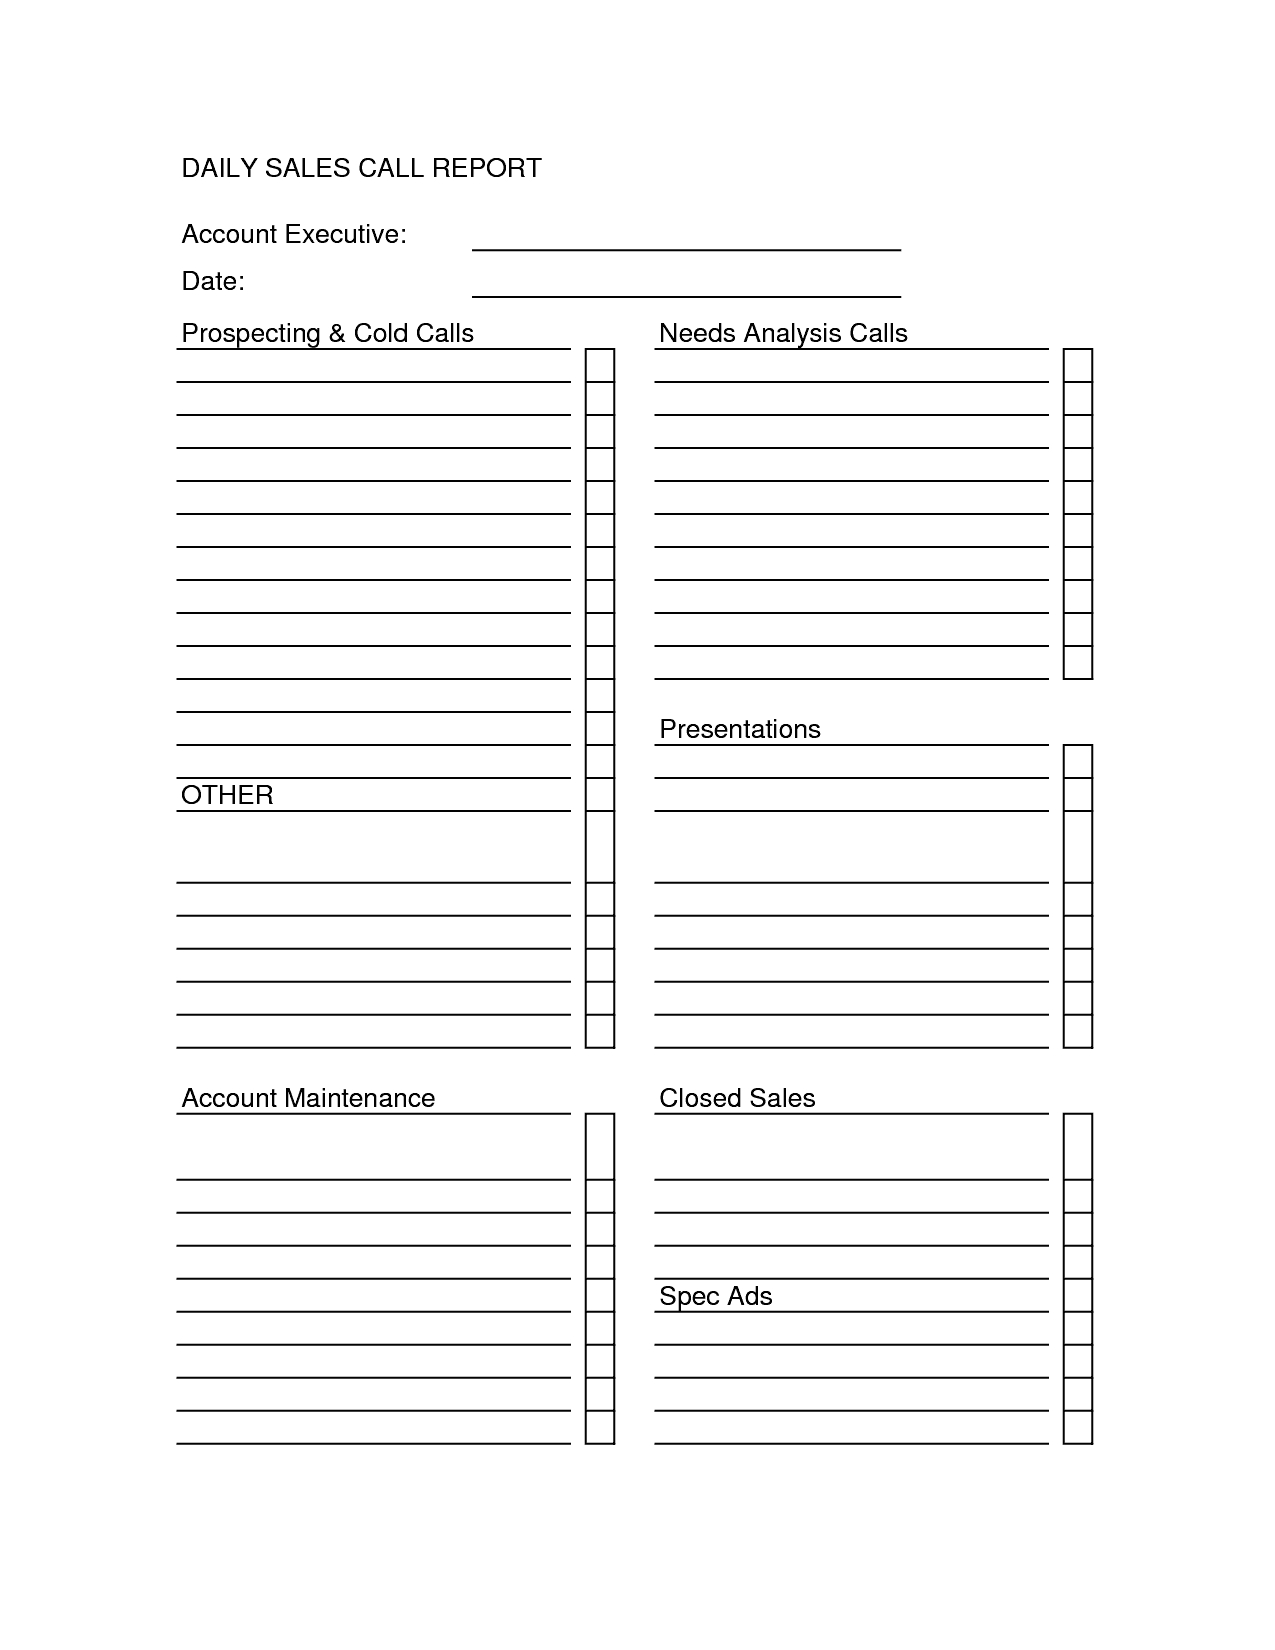 Sales Call Report Templates - Word Excel Fomats Throughout Sales Call Report Template